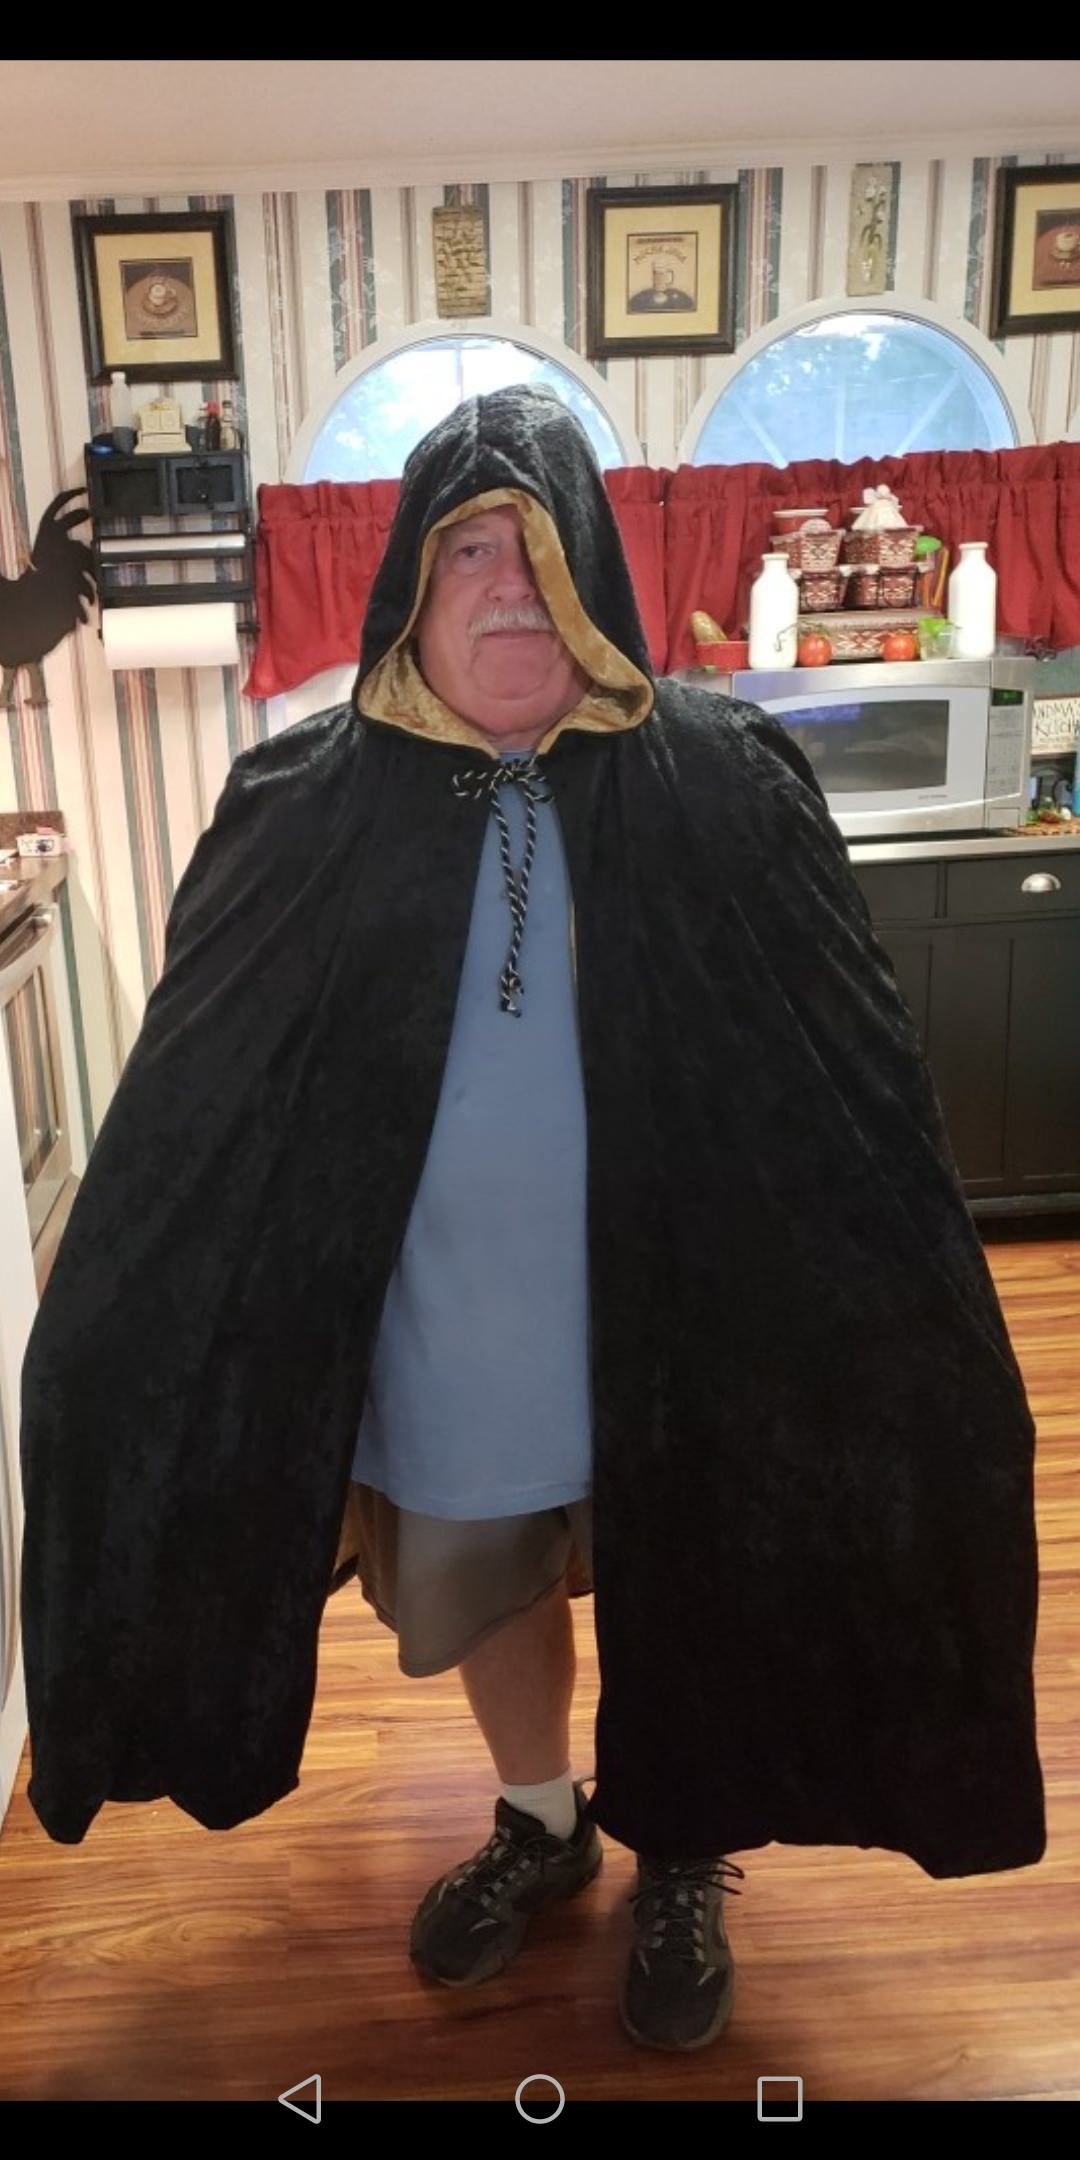 My mom made a warlock cloak for my son for Halloween. She made my dad wear it so she could send me a picture of it.